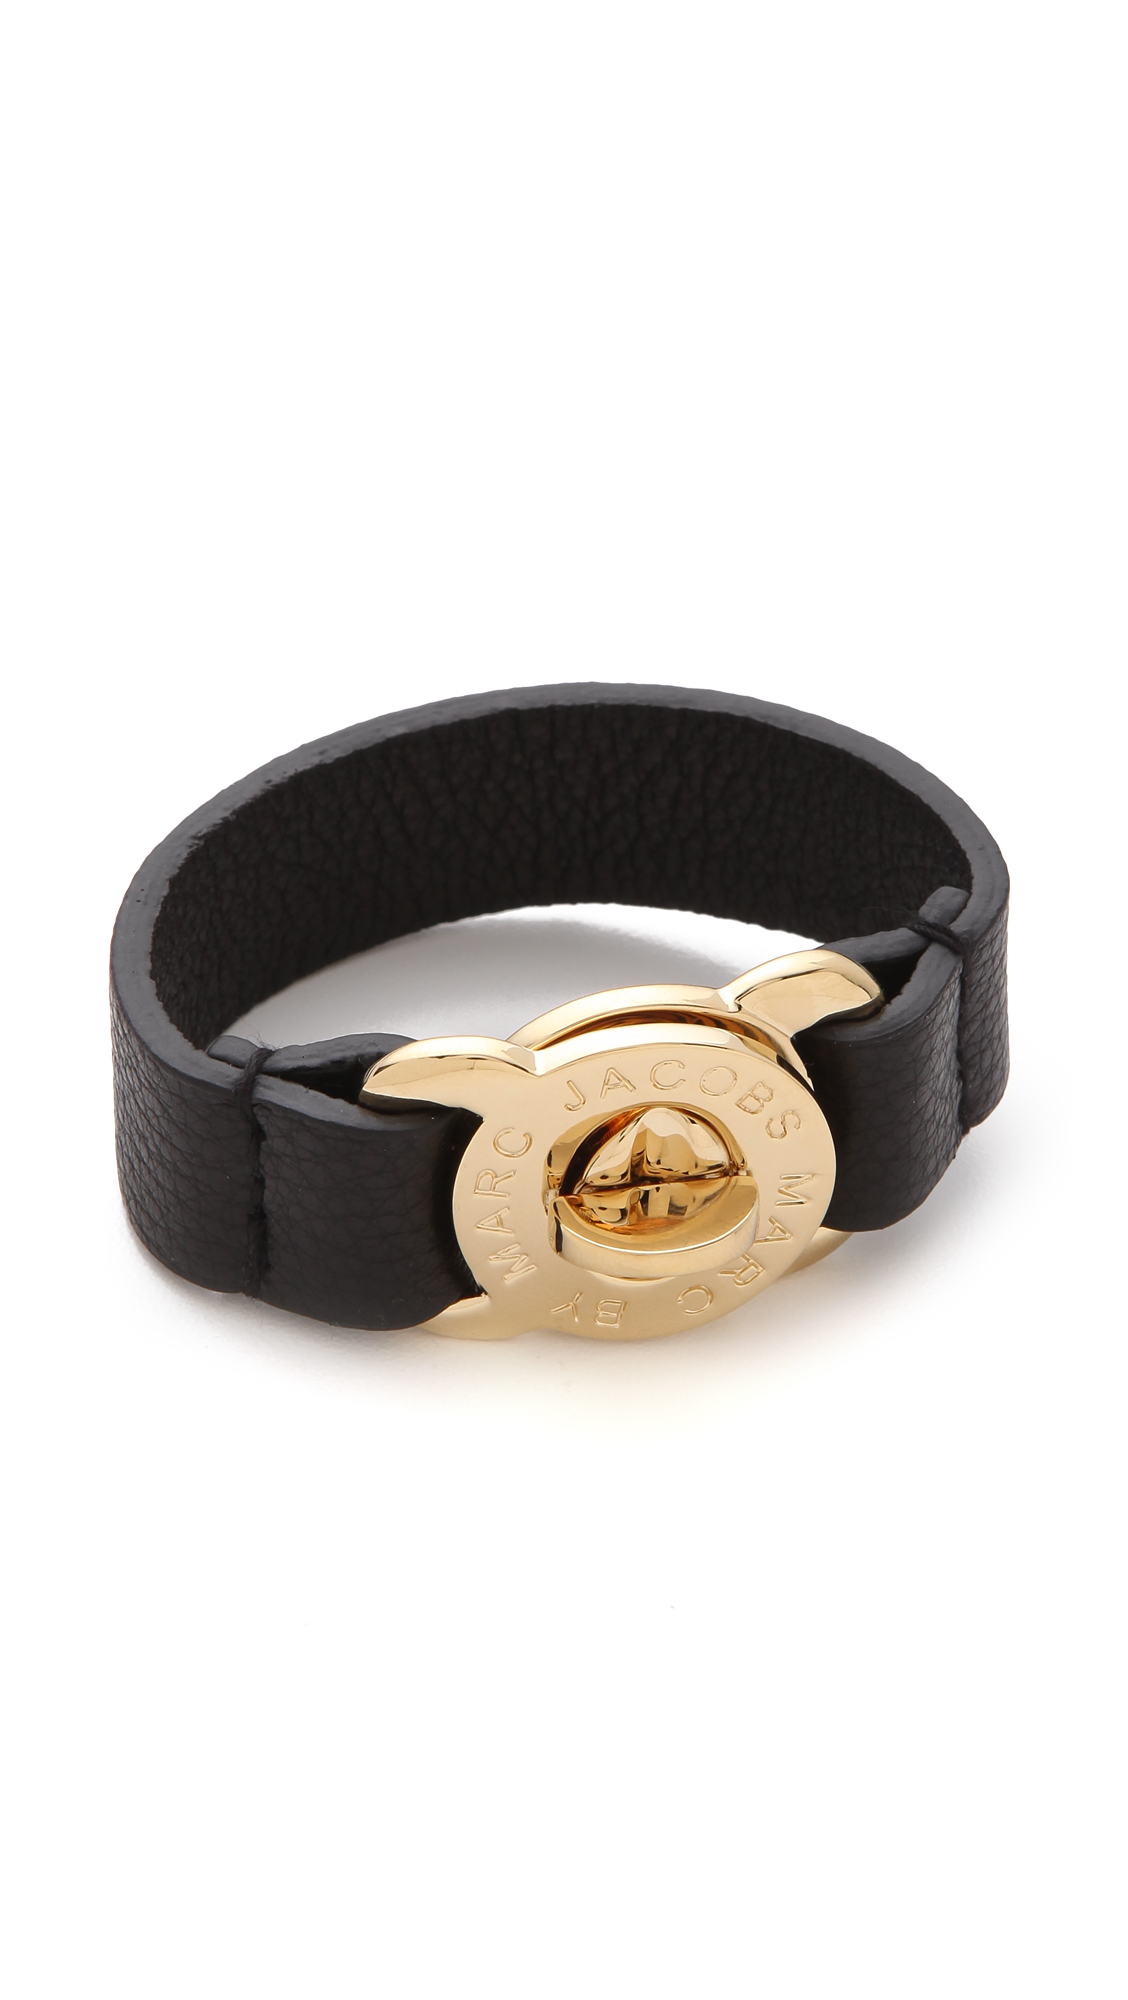 Lyst - Marc By Marc Jacobs Large Turnlock Leather Bracelet in Black